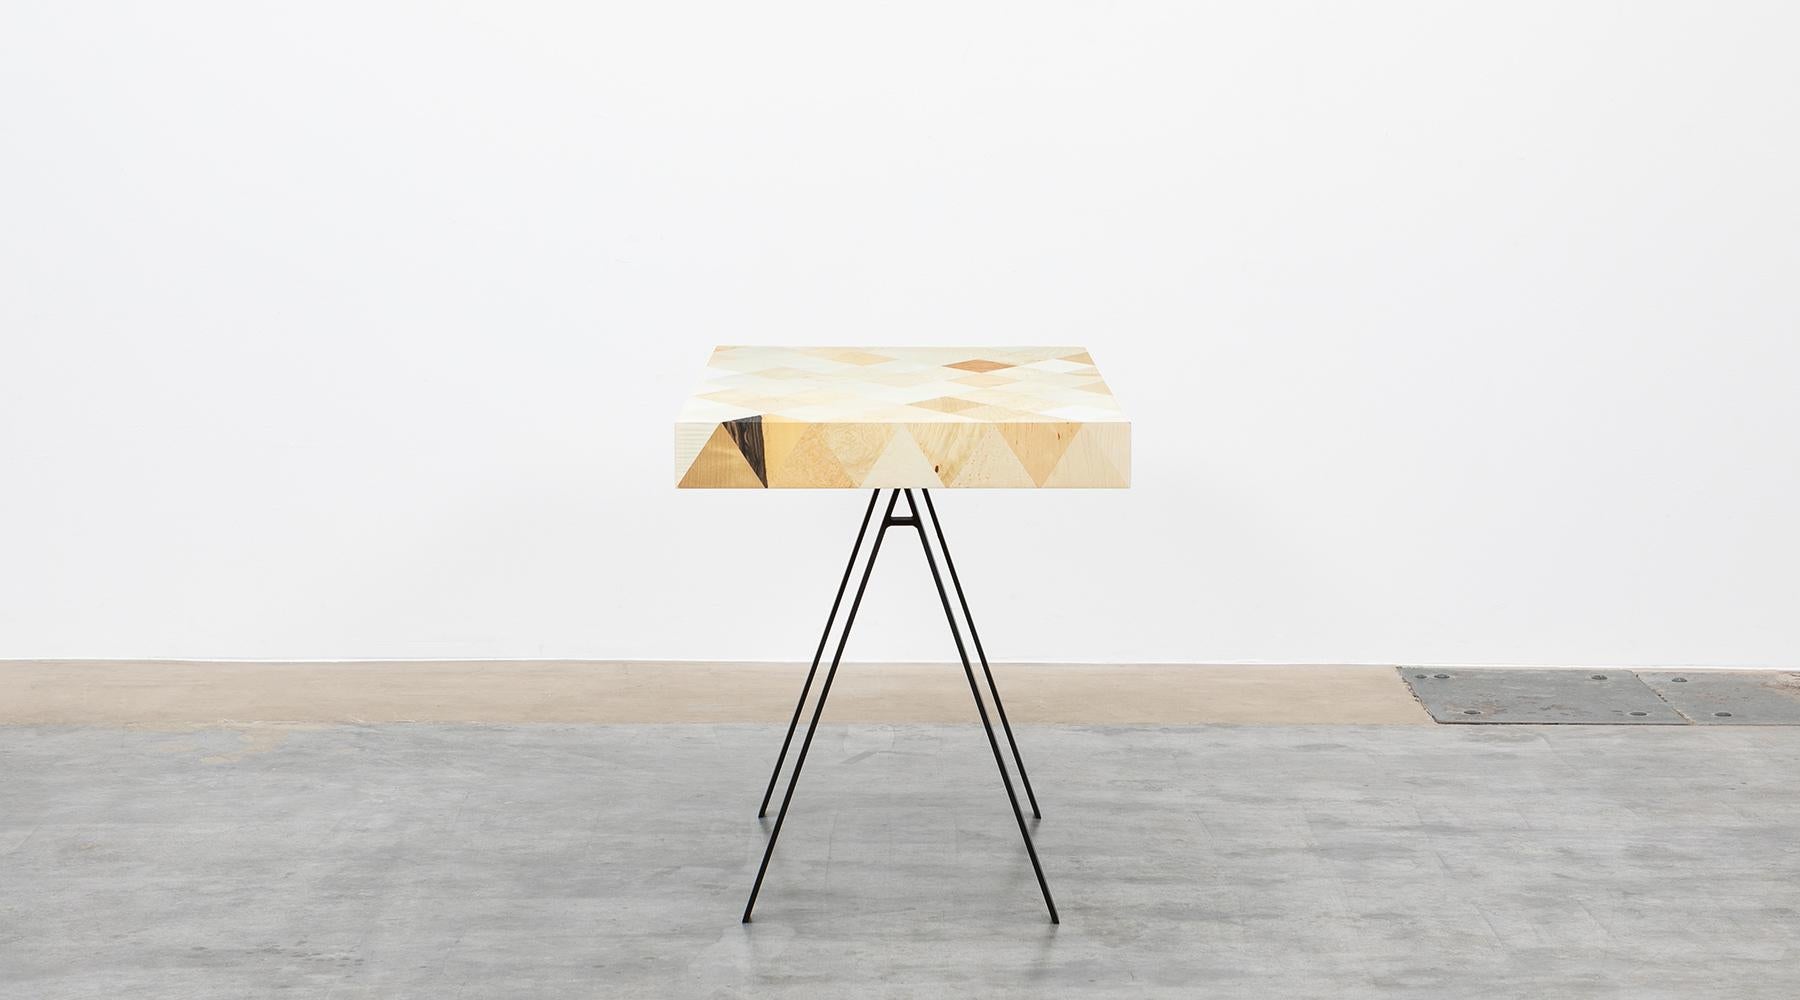 Stunning writing desk by contemporary German Artist Johannes Hock. 
A well proportioned body situated on a metal base. The surface of rhombs, joined in different veneers, apparently flowing over the table edges. Manufactured by Atelier Johannes